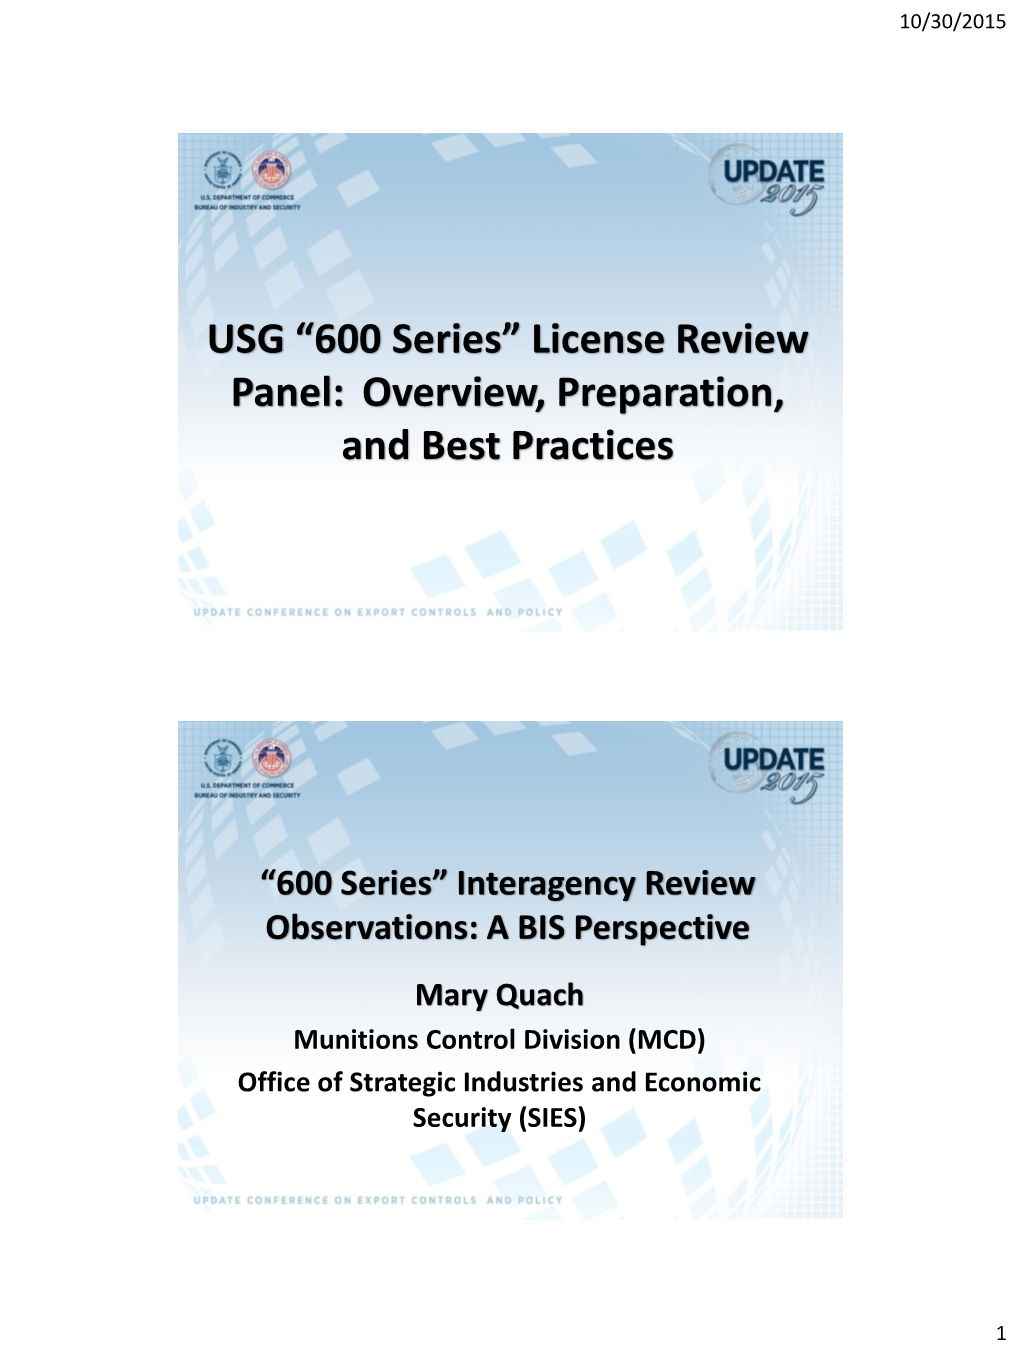 USG “600 Series” License Review Panel: Overview, Preparation, and Best Practices